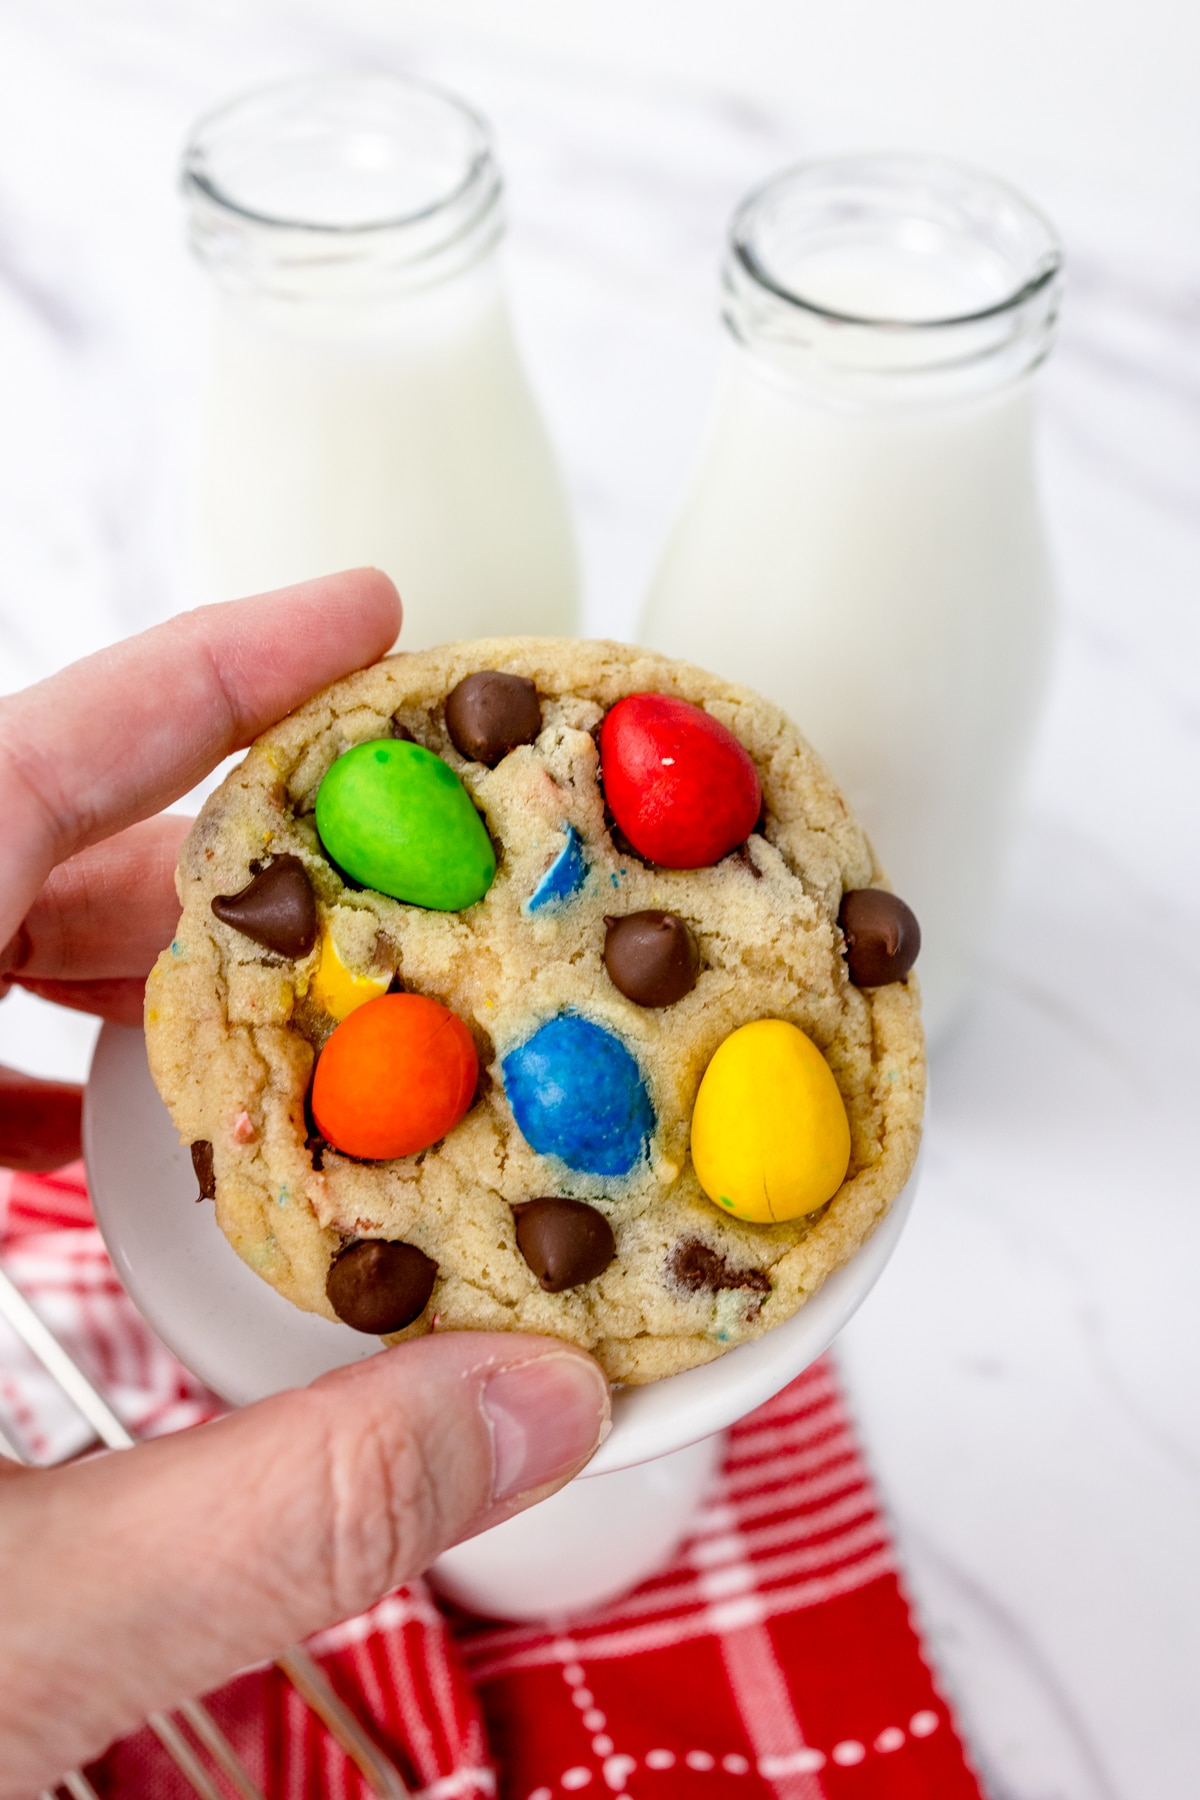 Close up of a Mini Egg Cookie being held in mid-air in front of two bottles of milk.